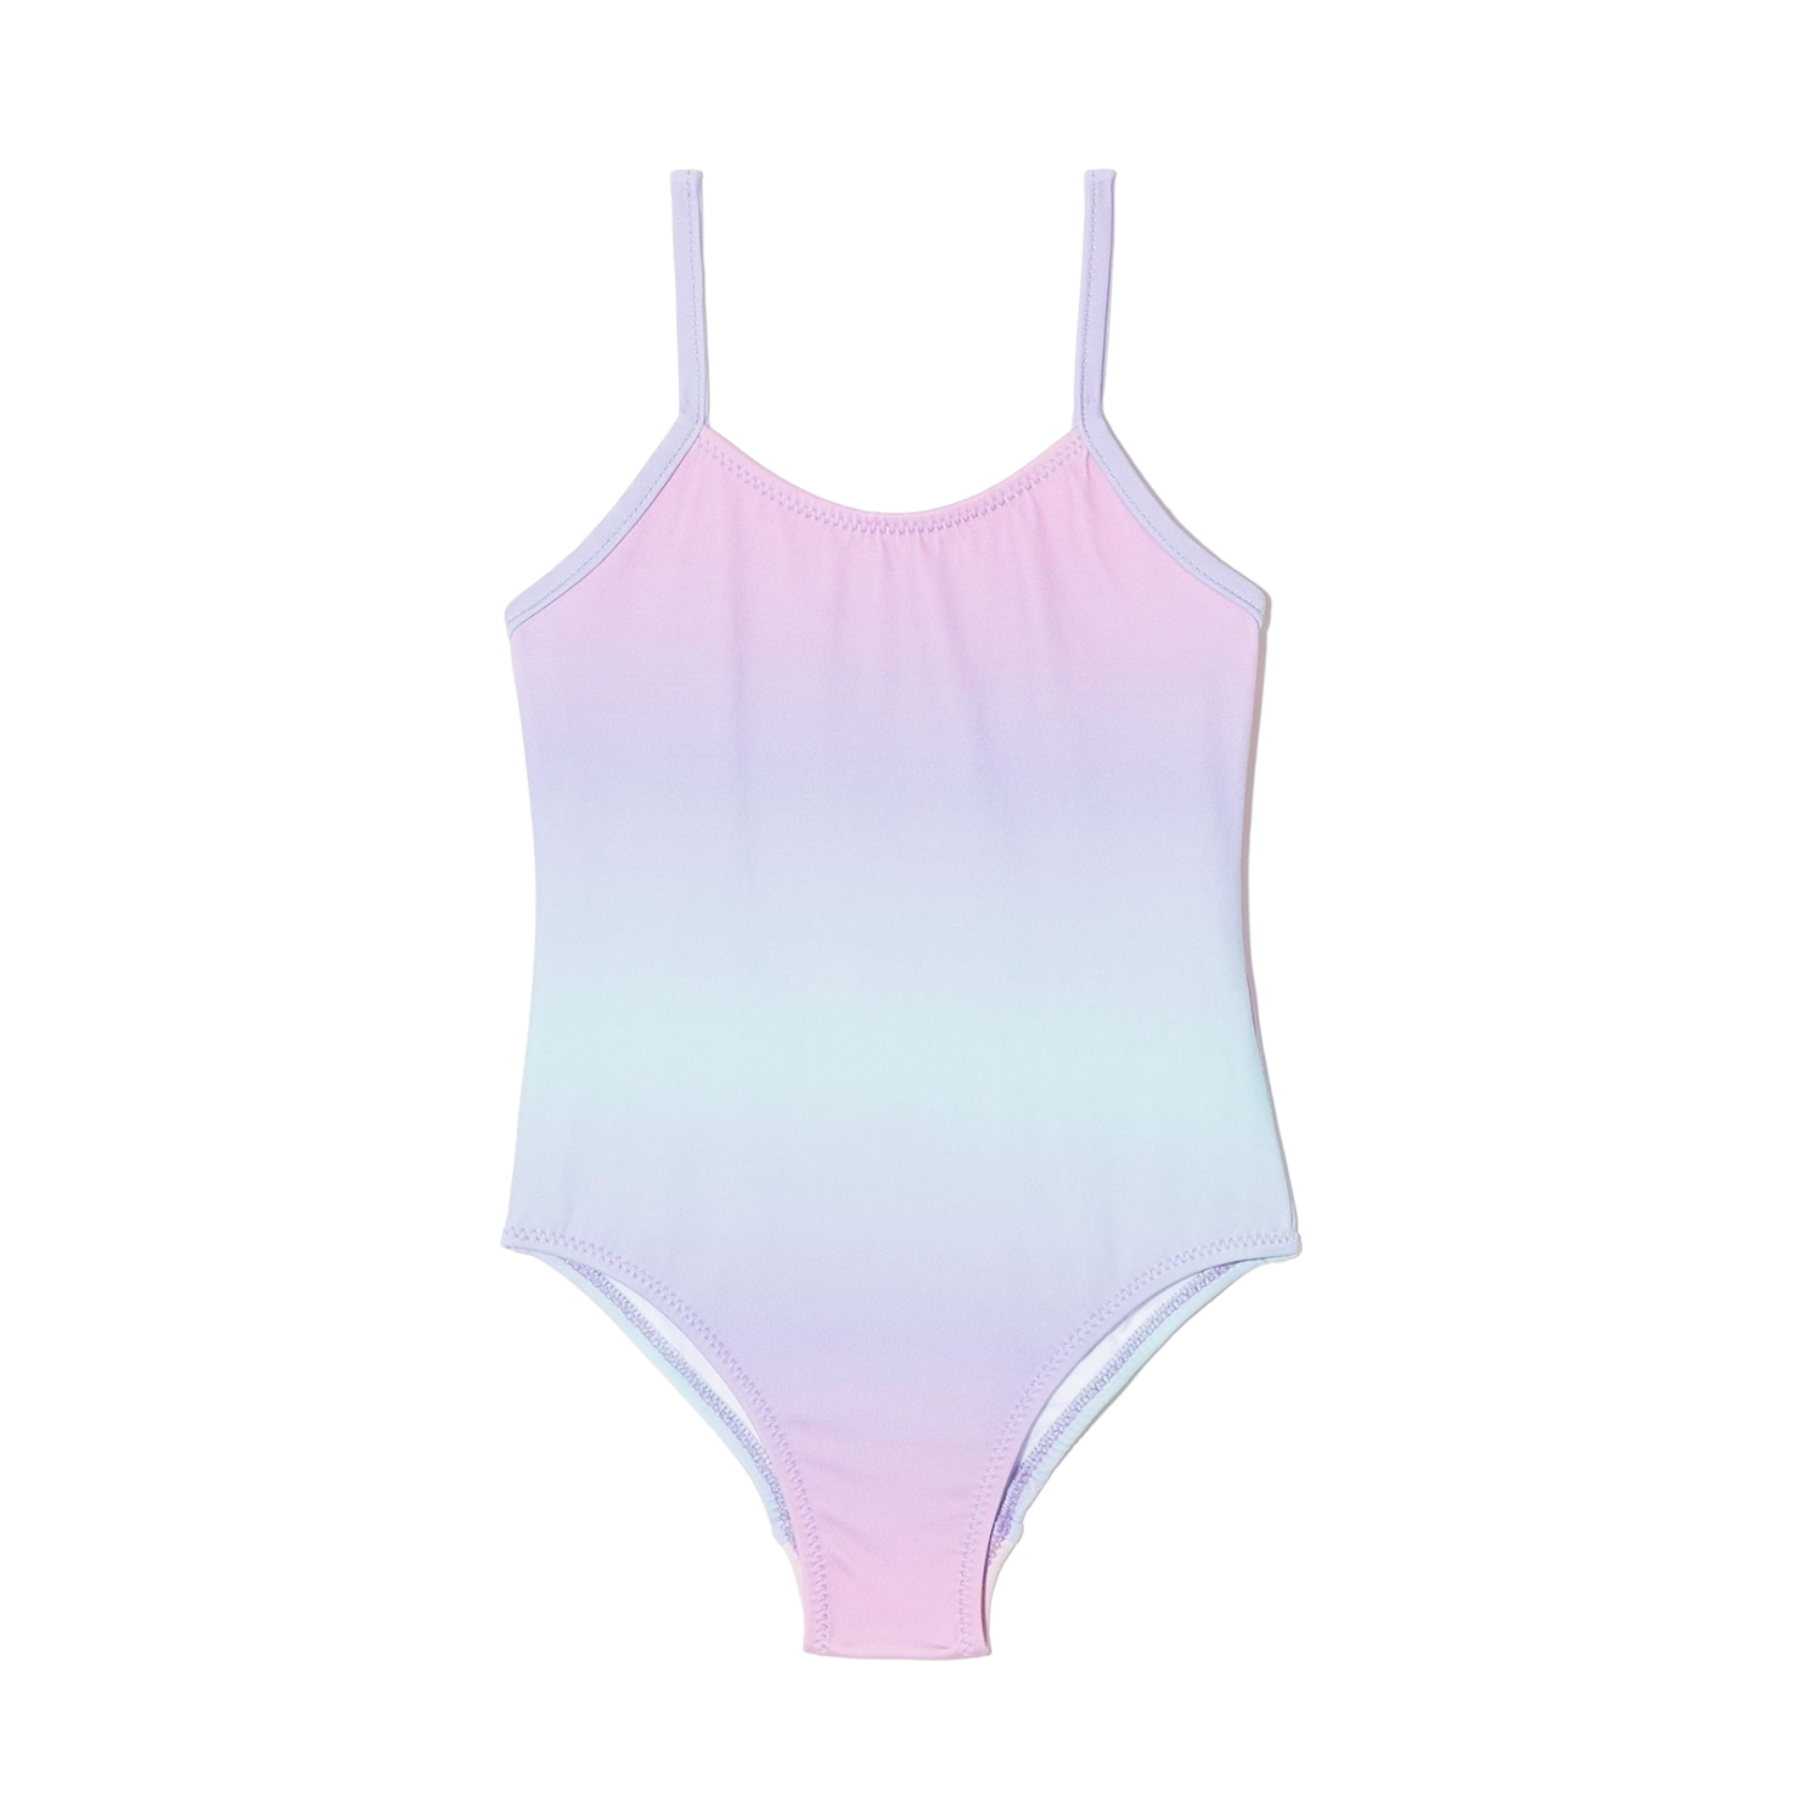 HUNDRED PIECES - Tie &amp; Die swimsuit - 3 years old